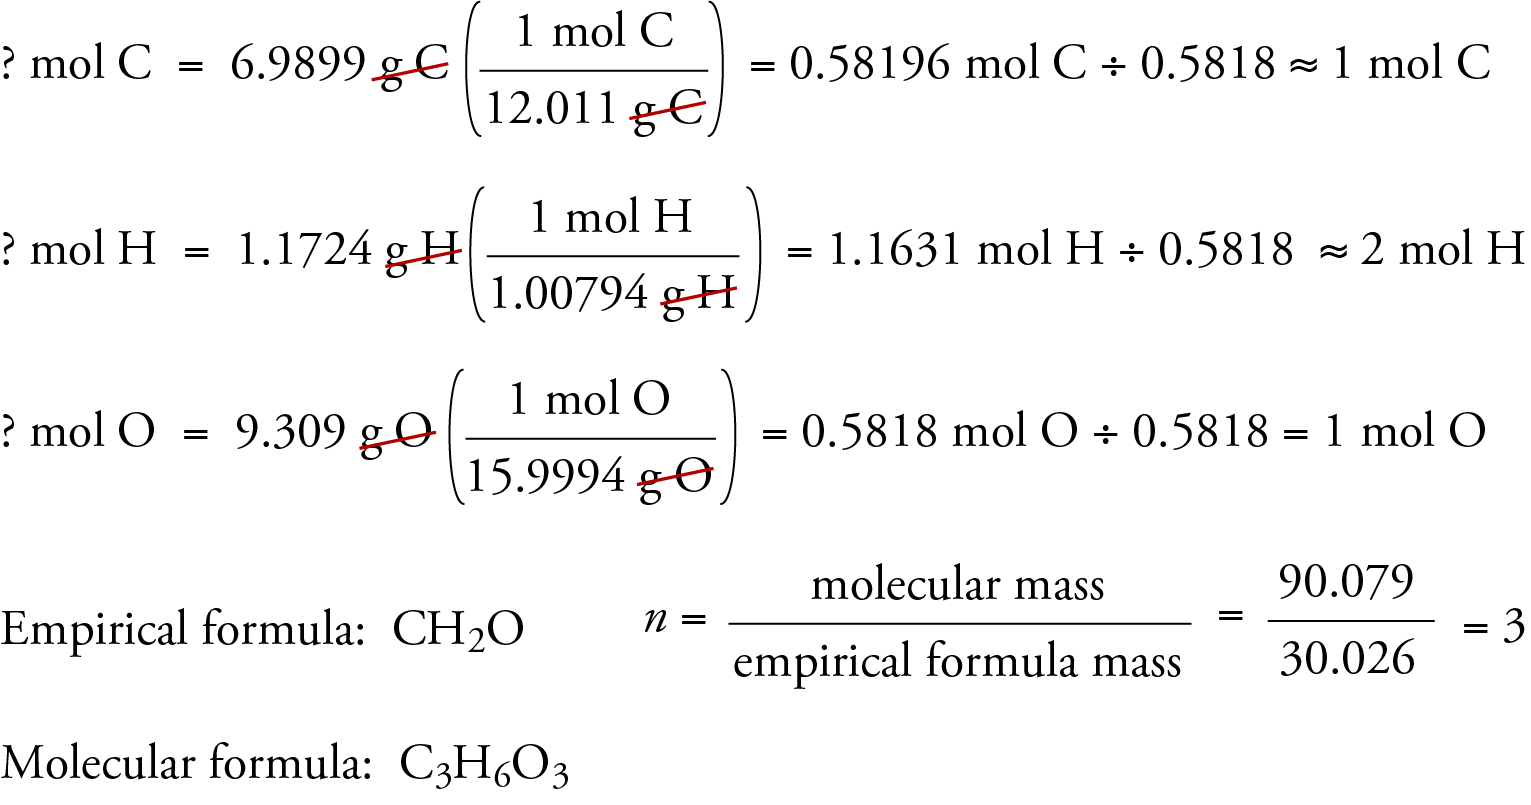 Image that shows the process of converting from the grams of carbon, hydrogen, and oxygen first to the empirical formula and then to the molecular formula